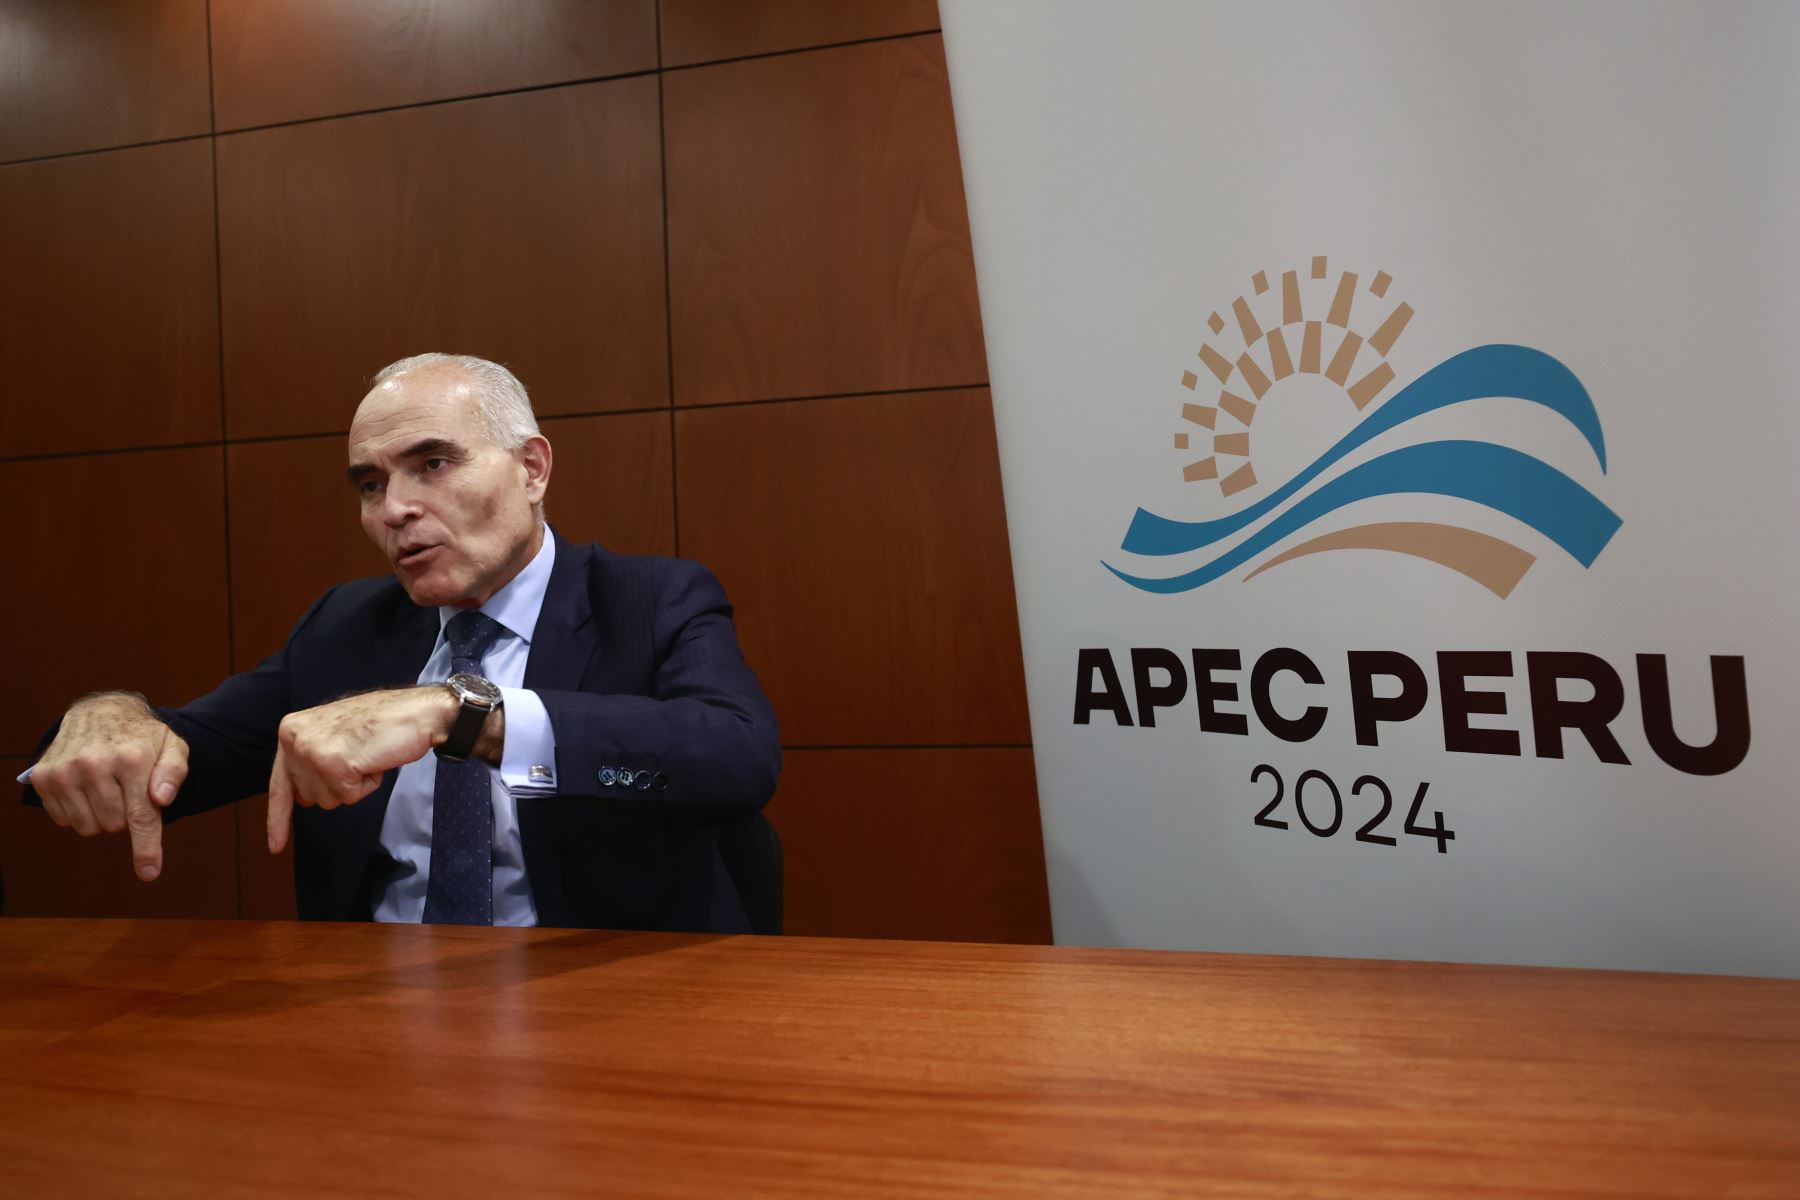 APEC Peru 2024 Food Security Ministerial Meeting to be held in